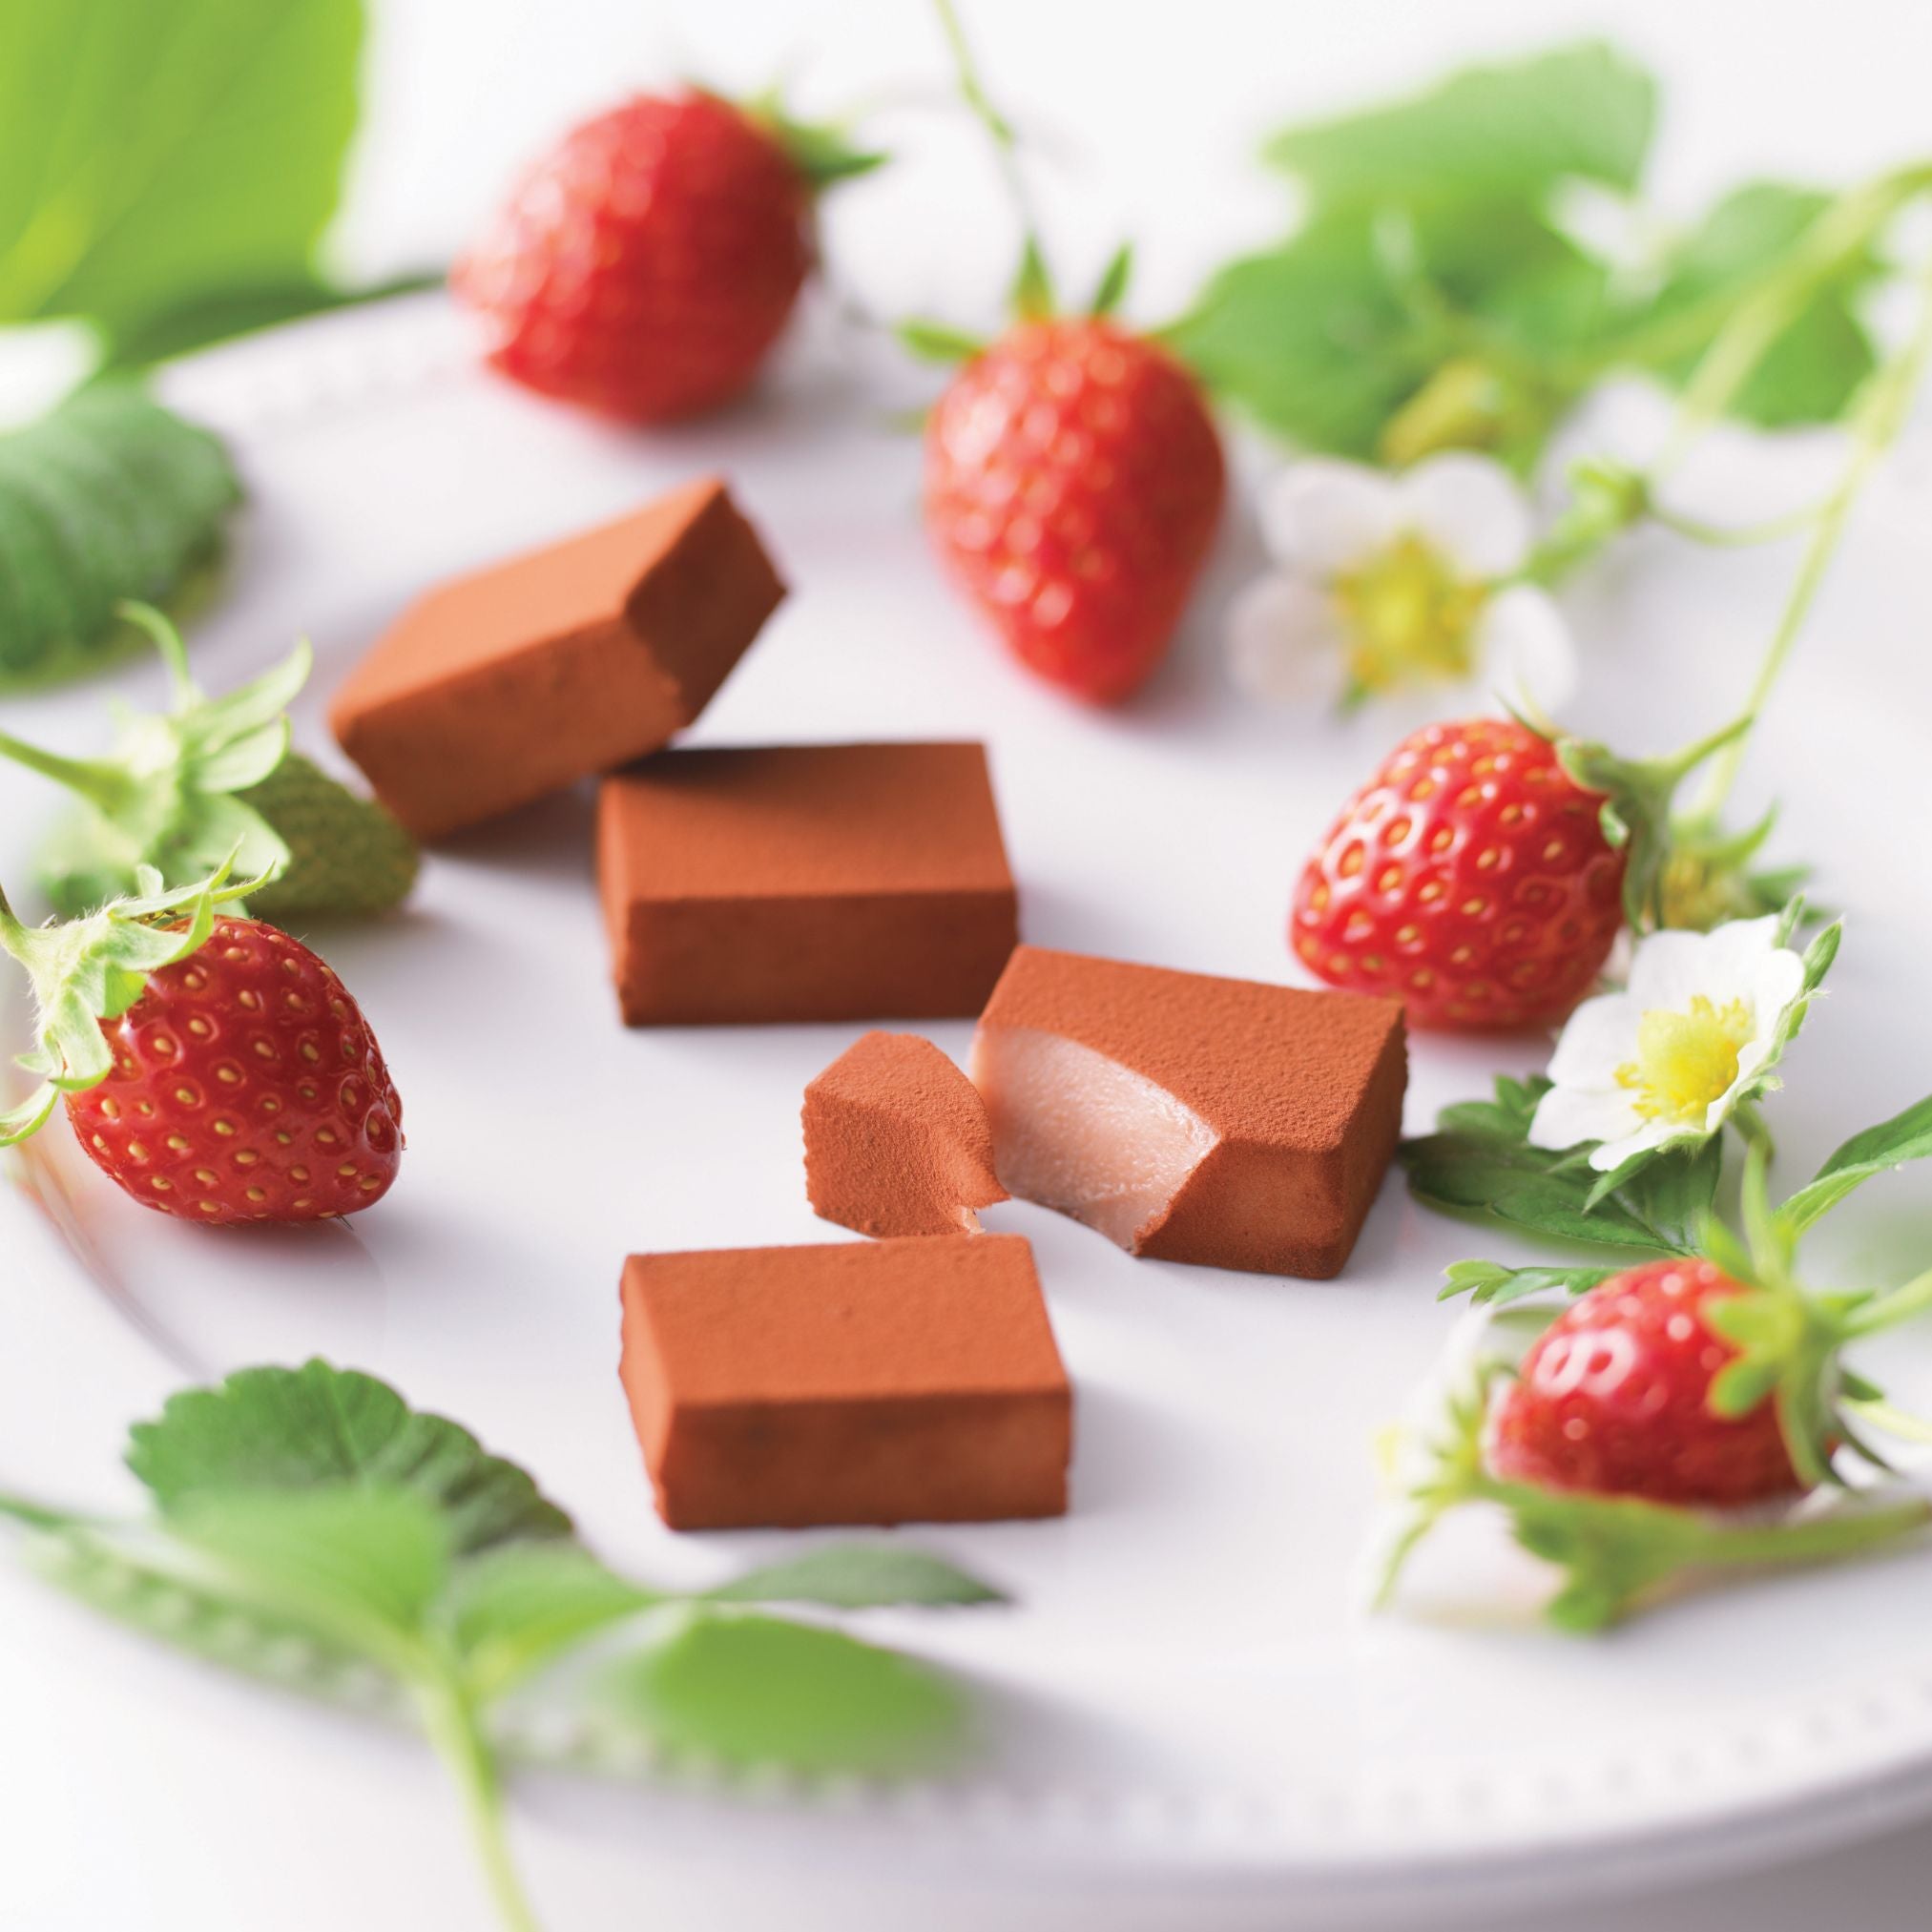 ROYCE' Chocolate - Nama Chocolate "Strawberry" - Image shows brown blocks of chocolates with accents of a white plate, red strawberries, and green leaves.